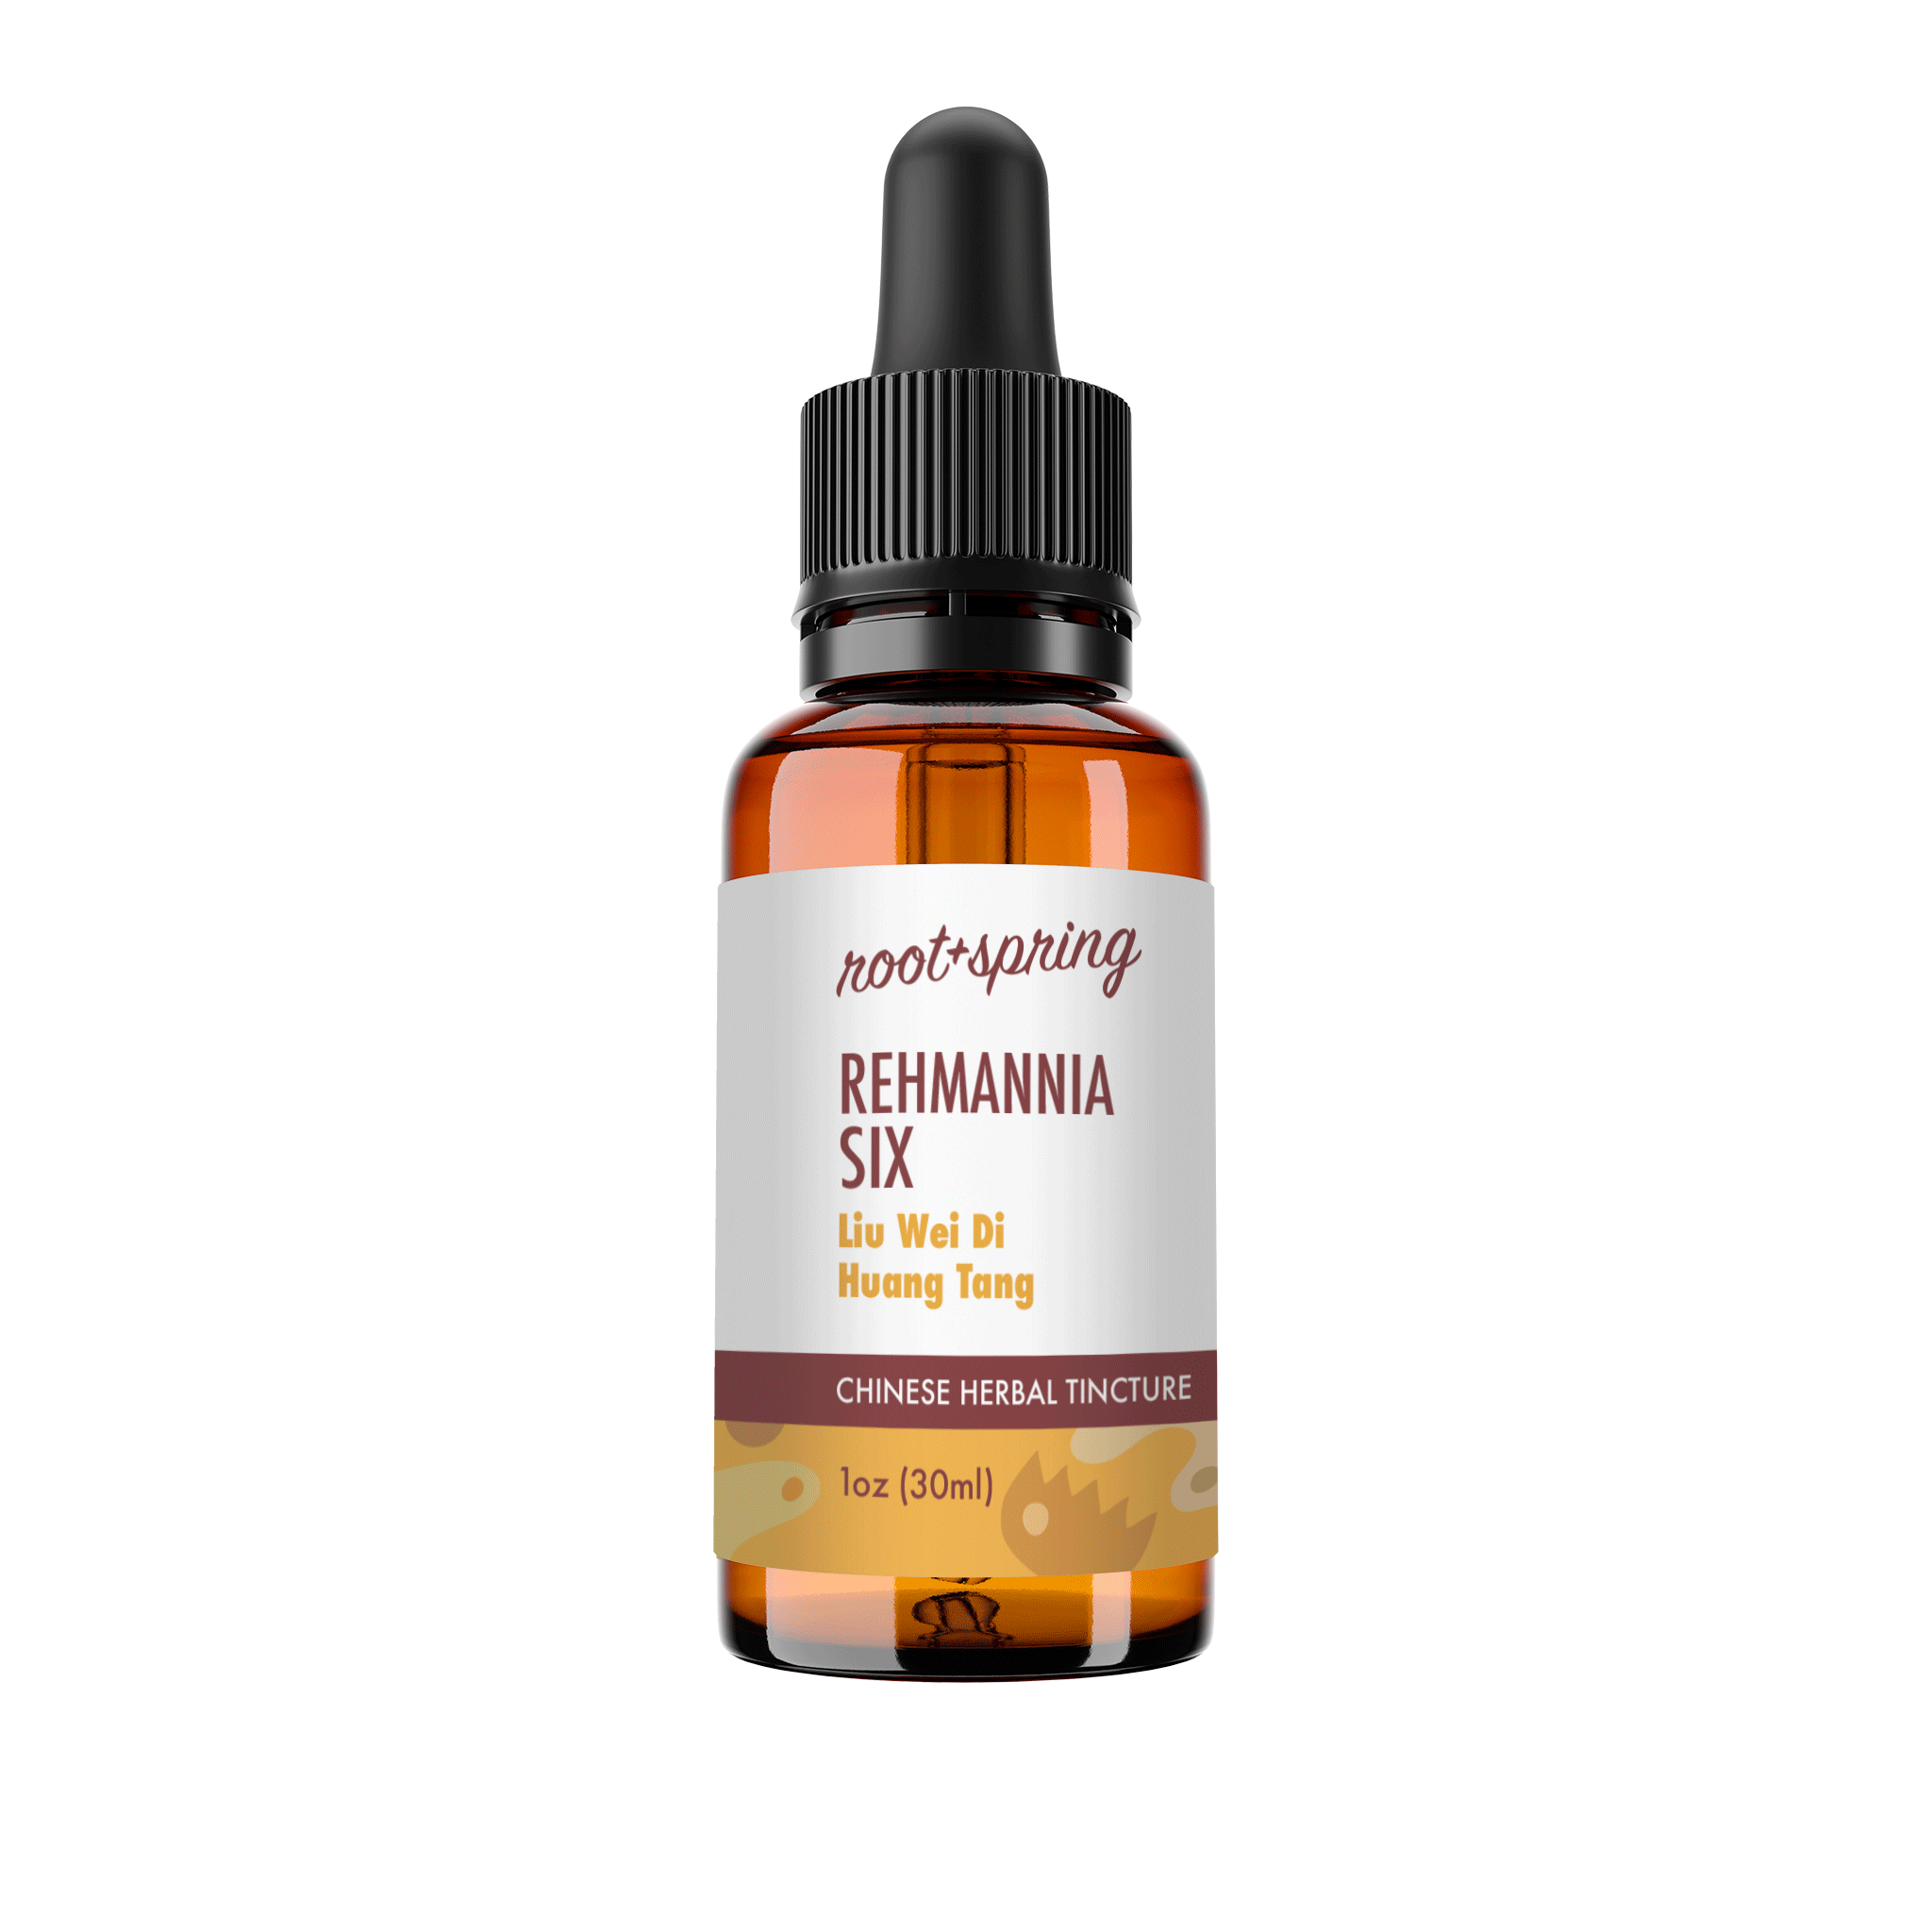 Amber eyedropper-top tincture bottle containing 1 fluid ounce (30 milliliters) of root + spring Rehmannia Six Liu Wei Di Huang Tang Chinese herbal tincture.